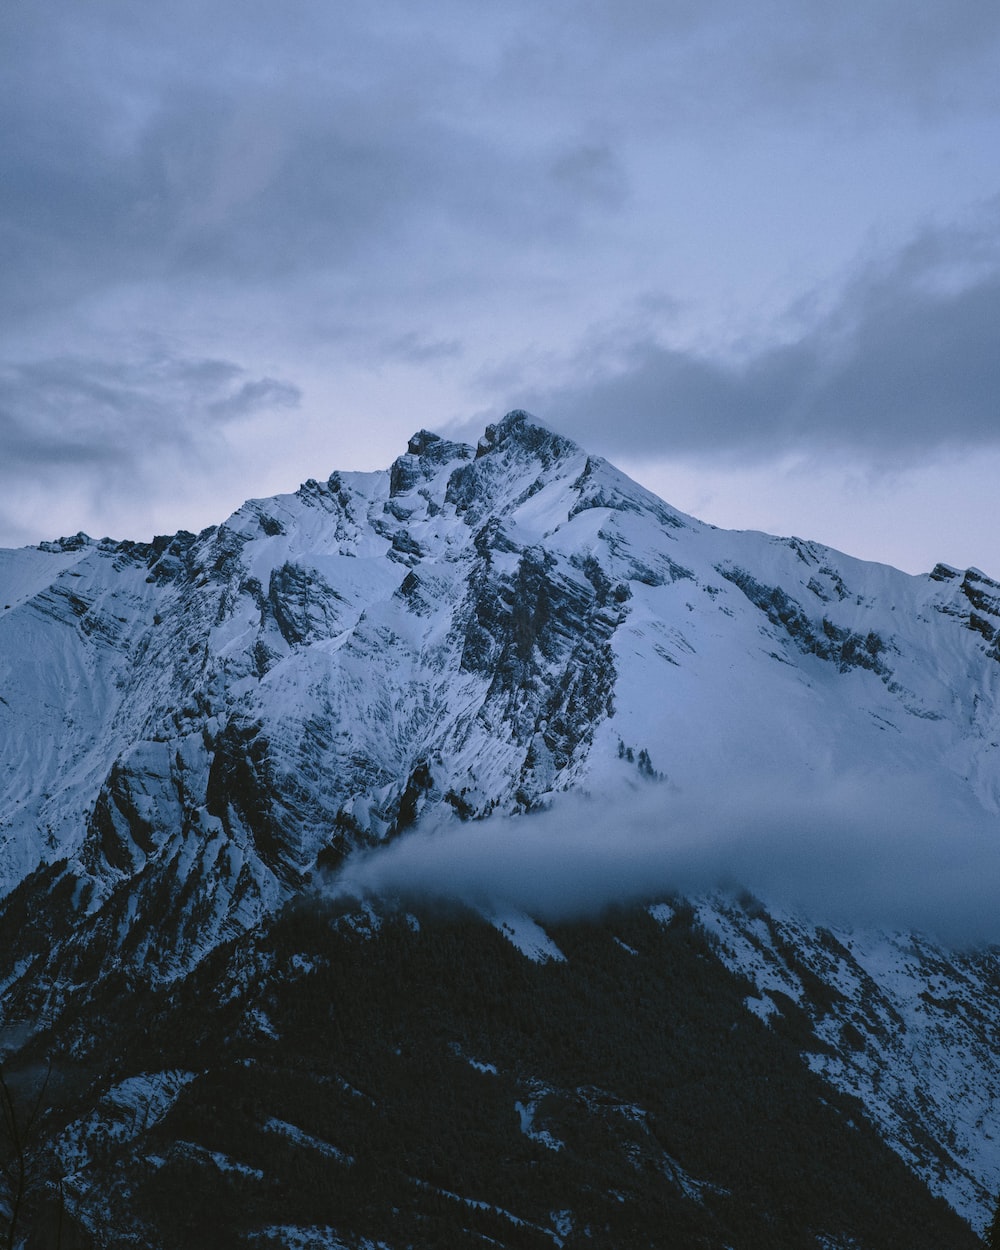 Snow Covered Mountains Under Black Cloudy Sky Wallpapers